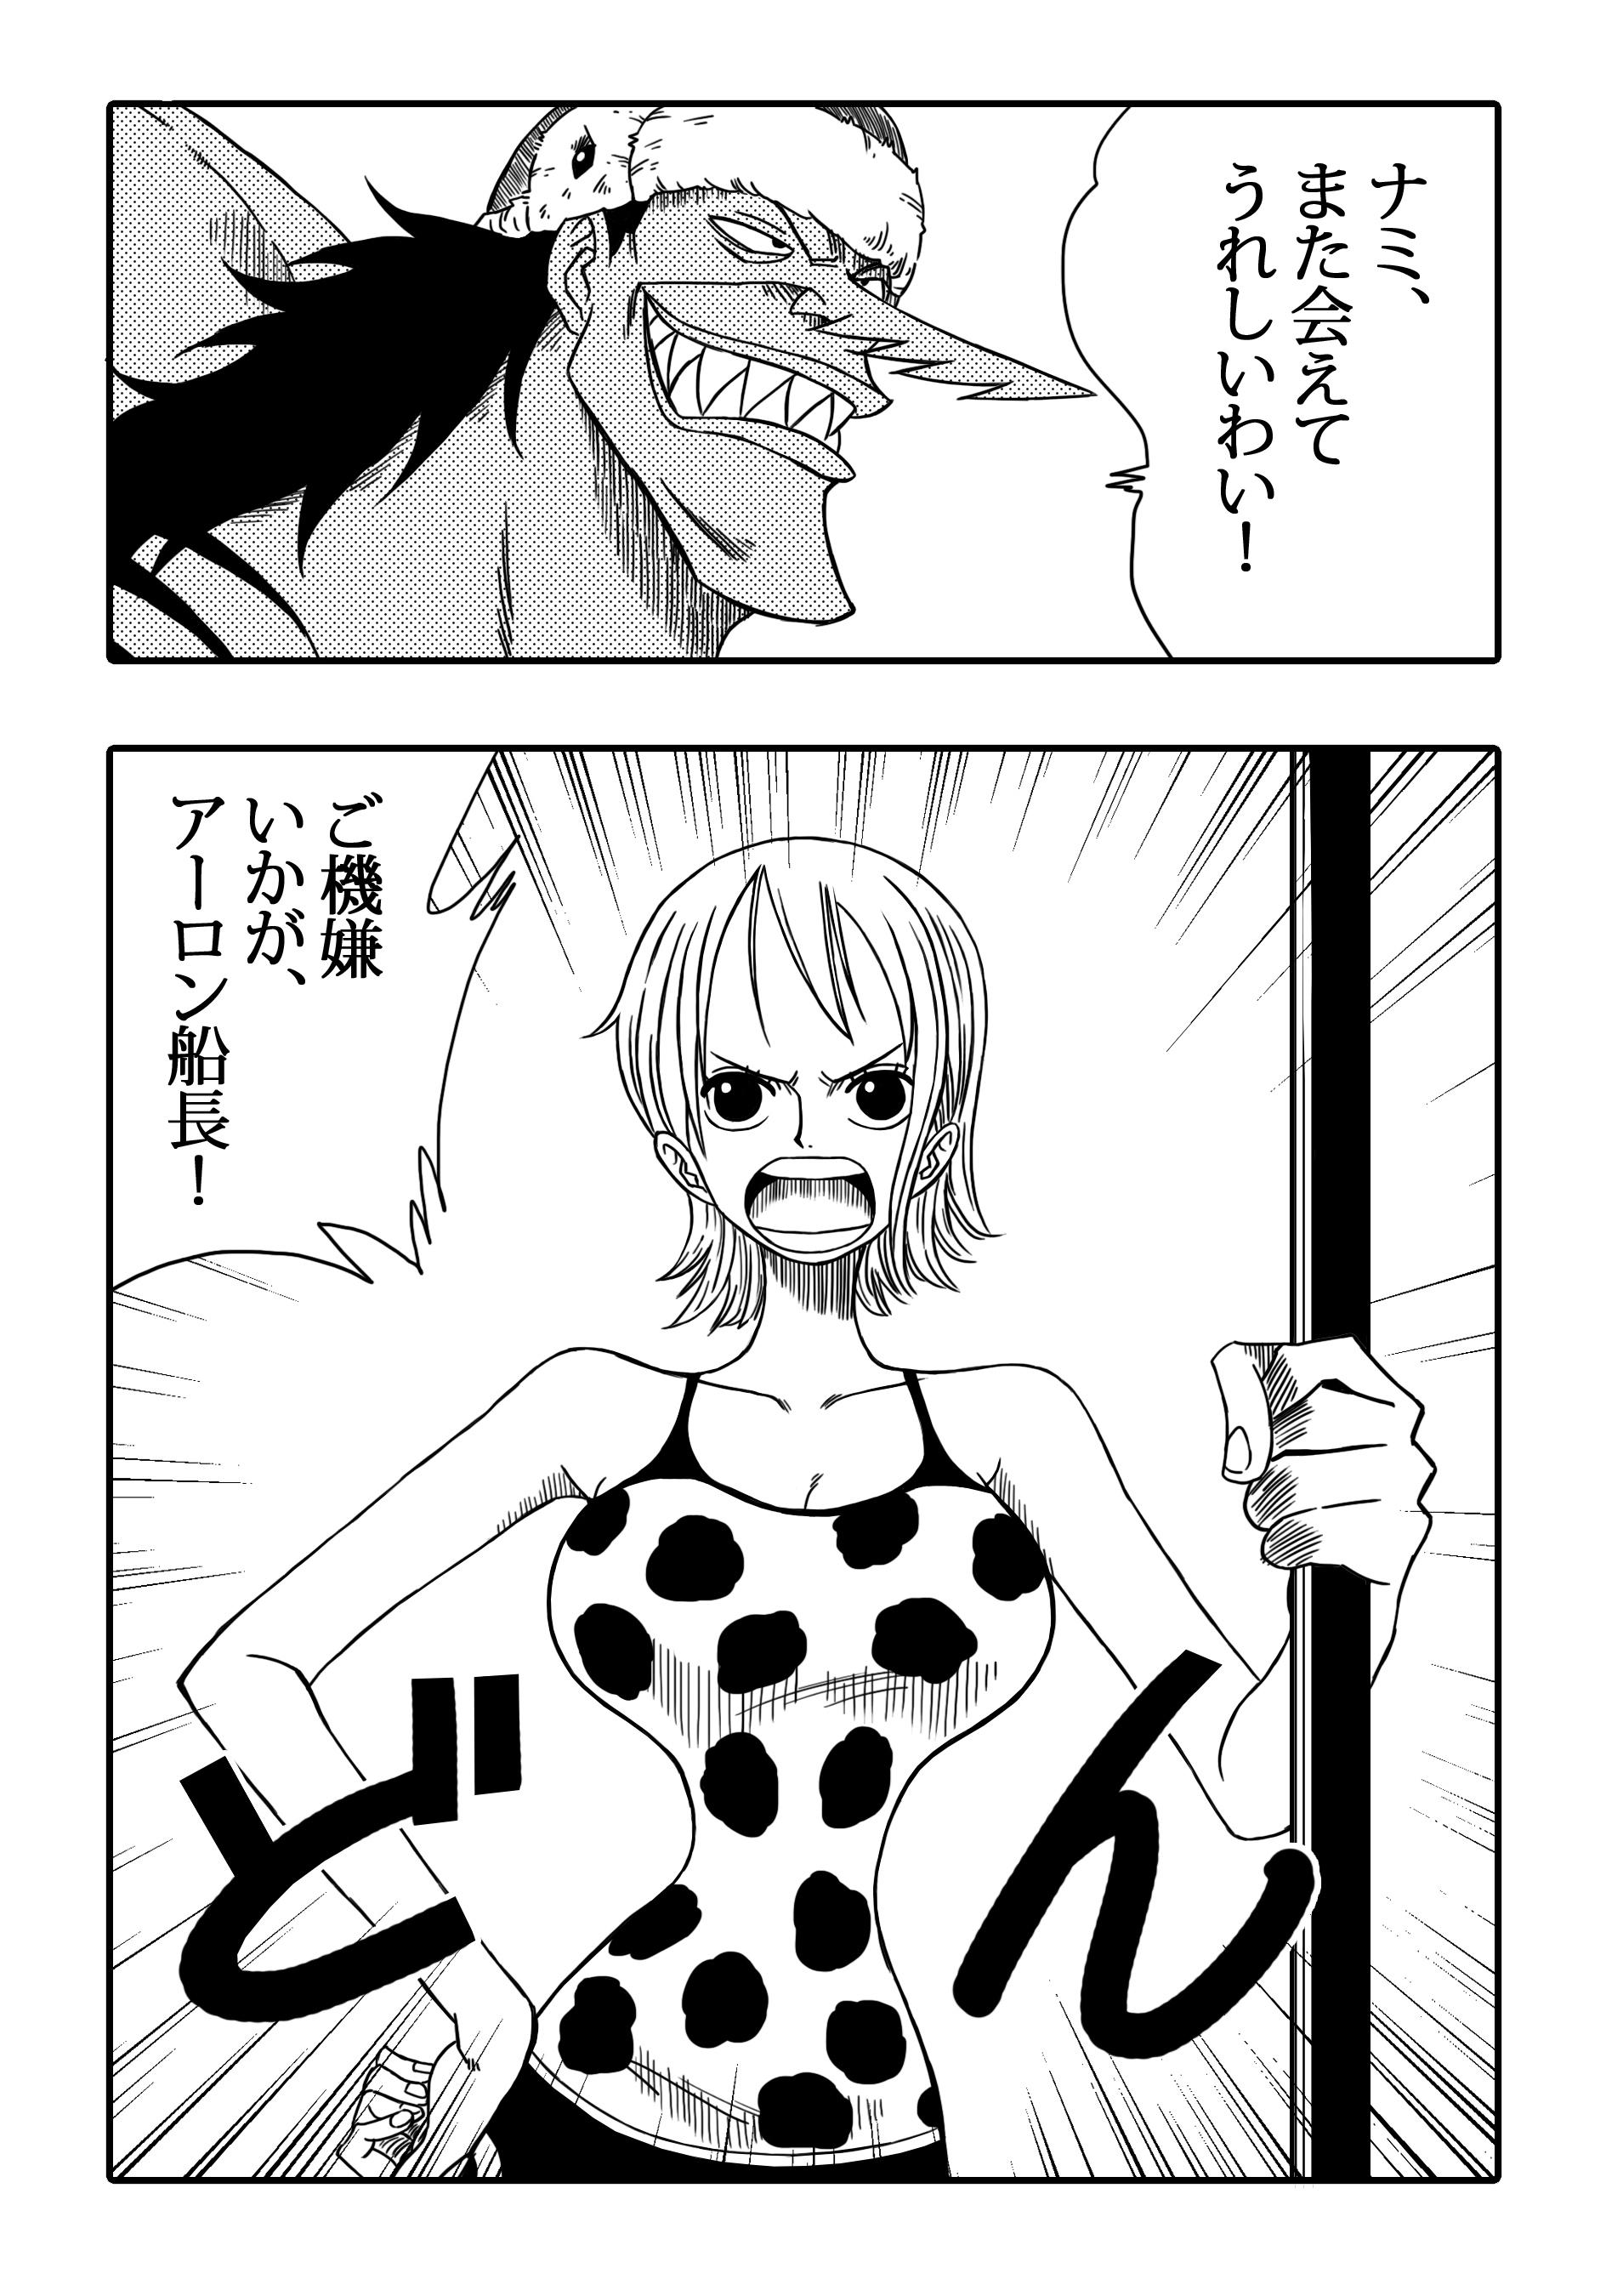 Thot Two Piece - Nami vs Arlong - One piece Snatch - Page 3